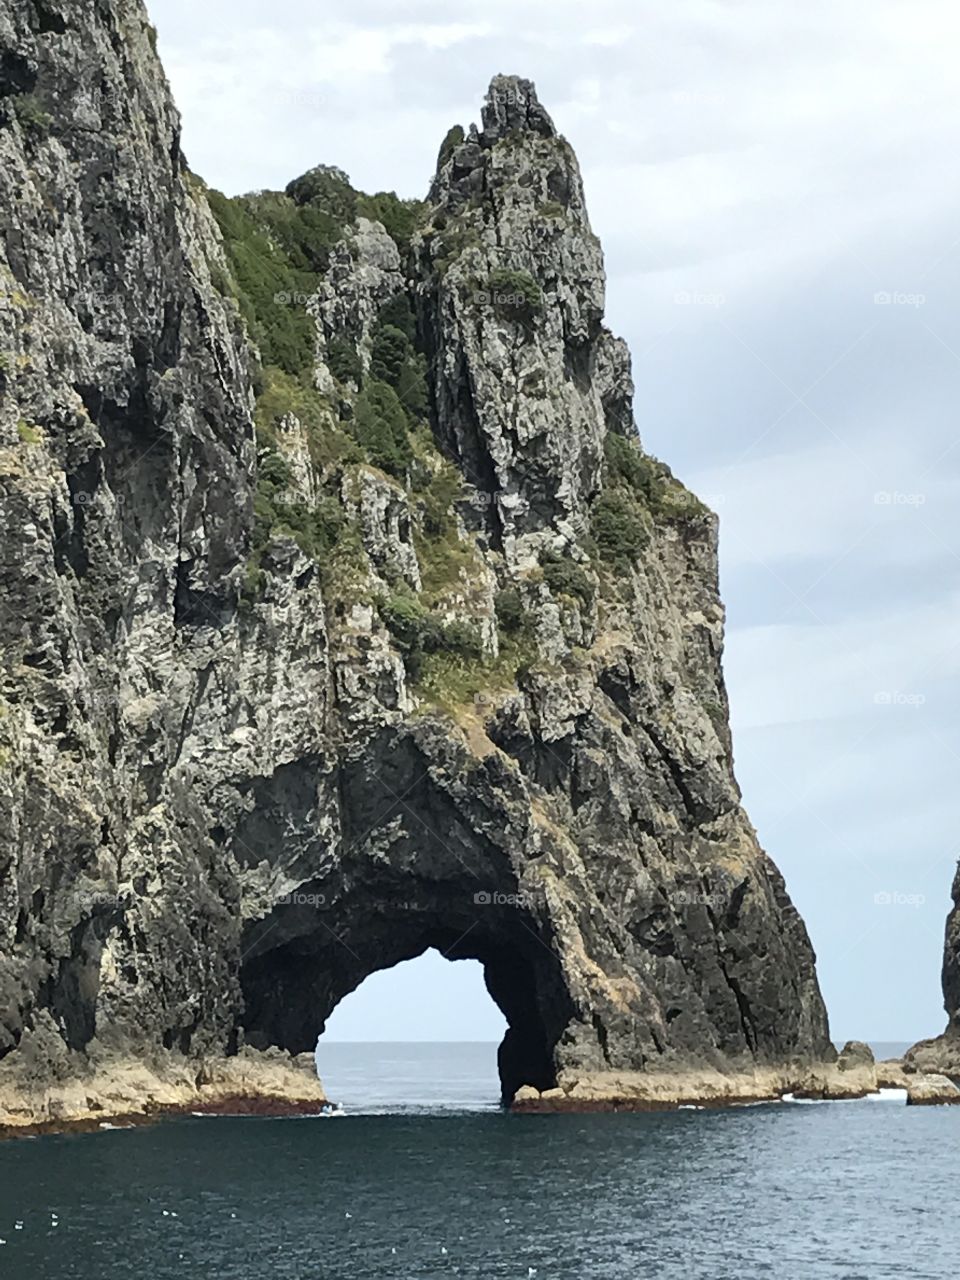 Hole in the rock
